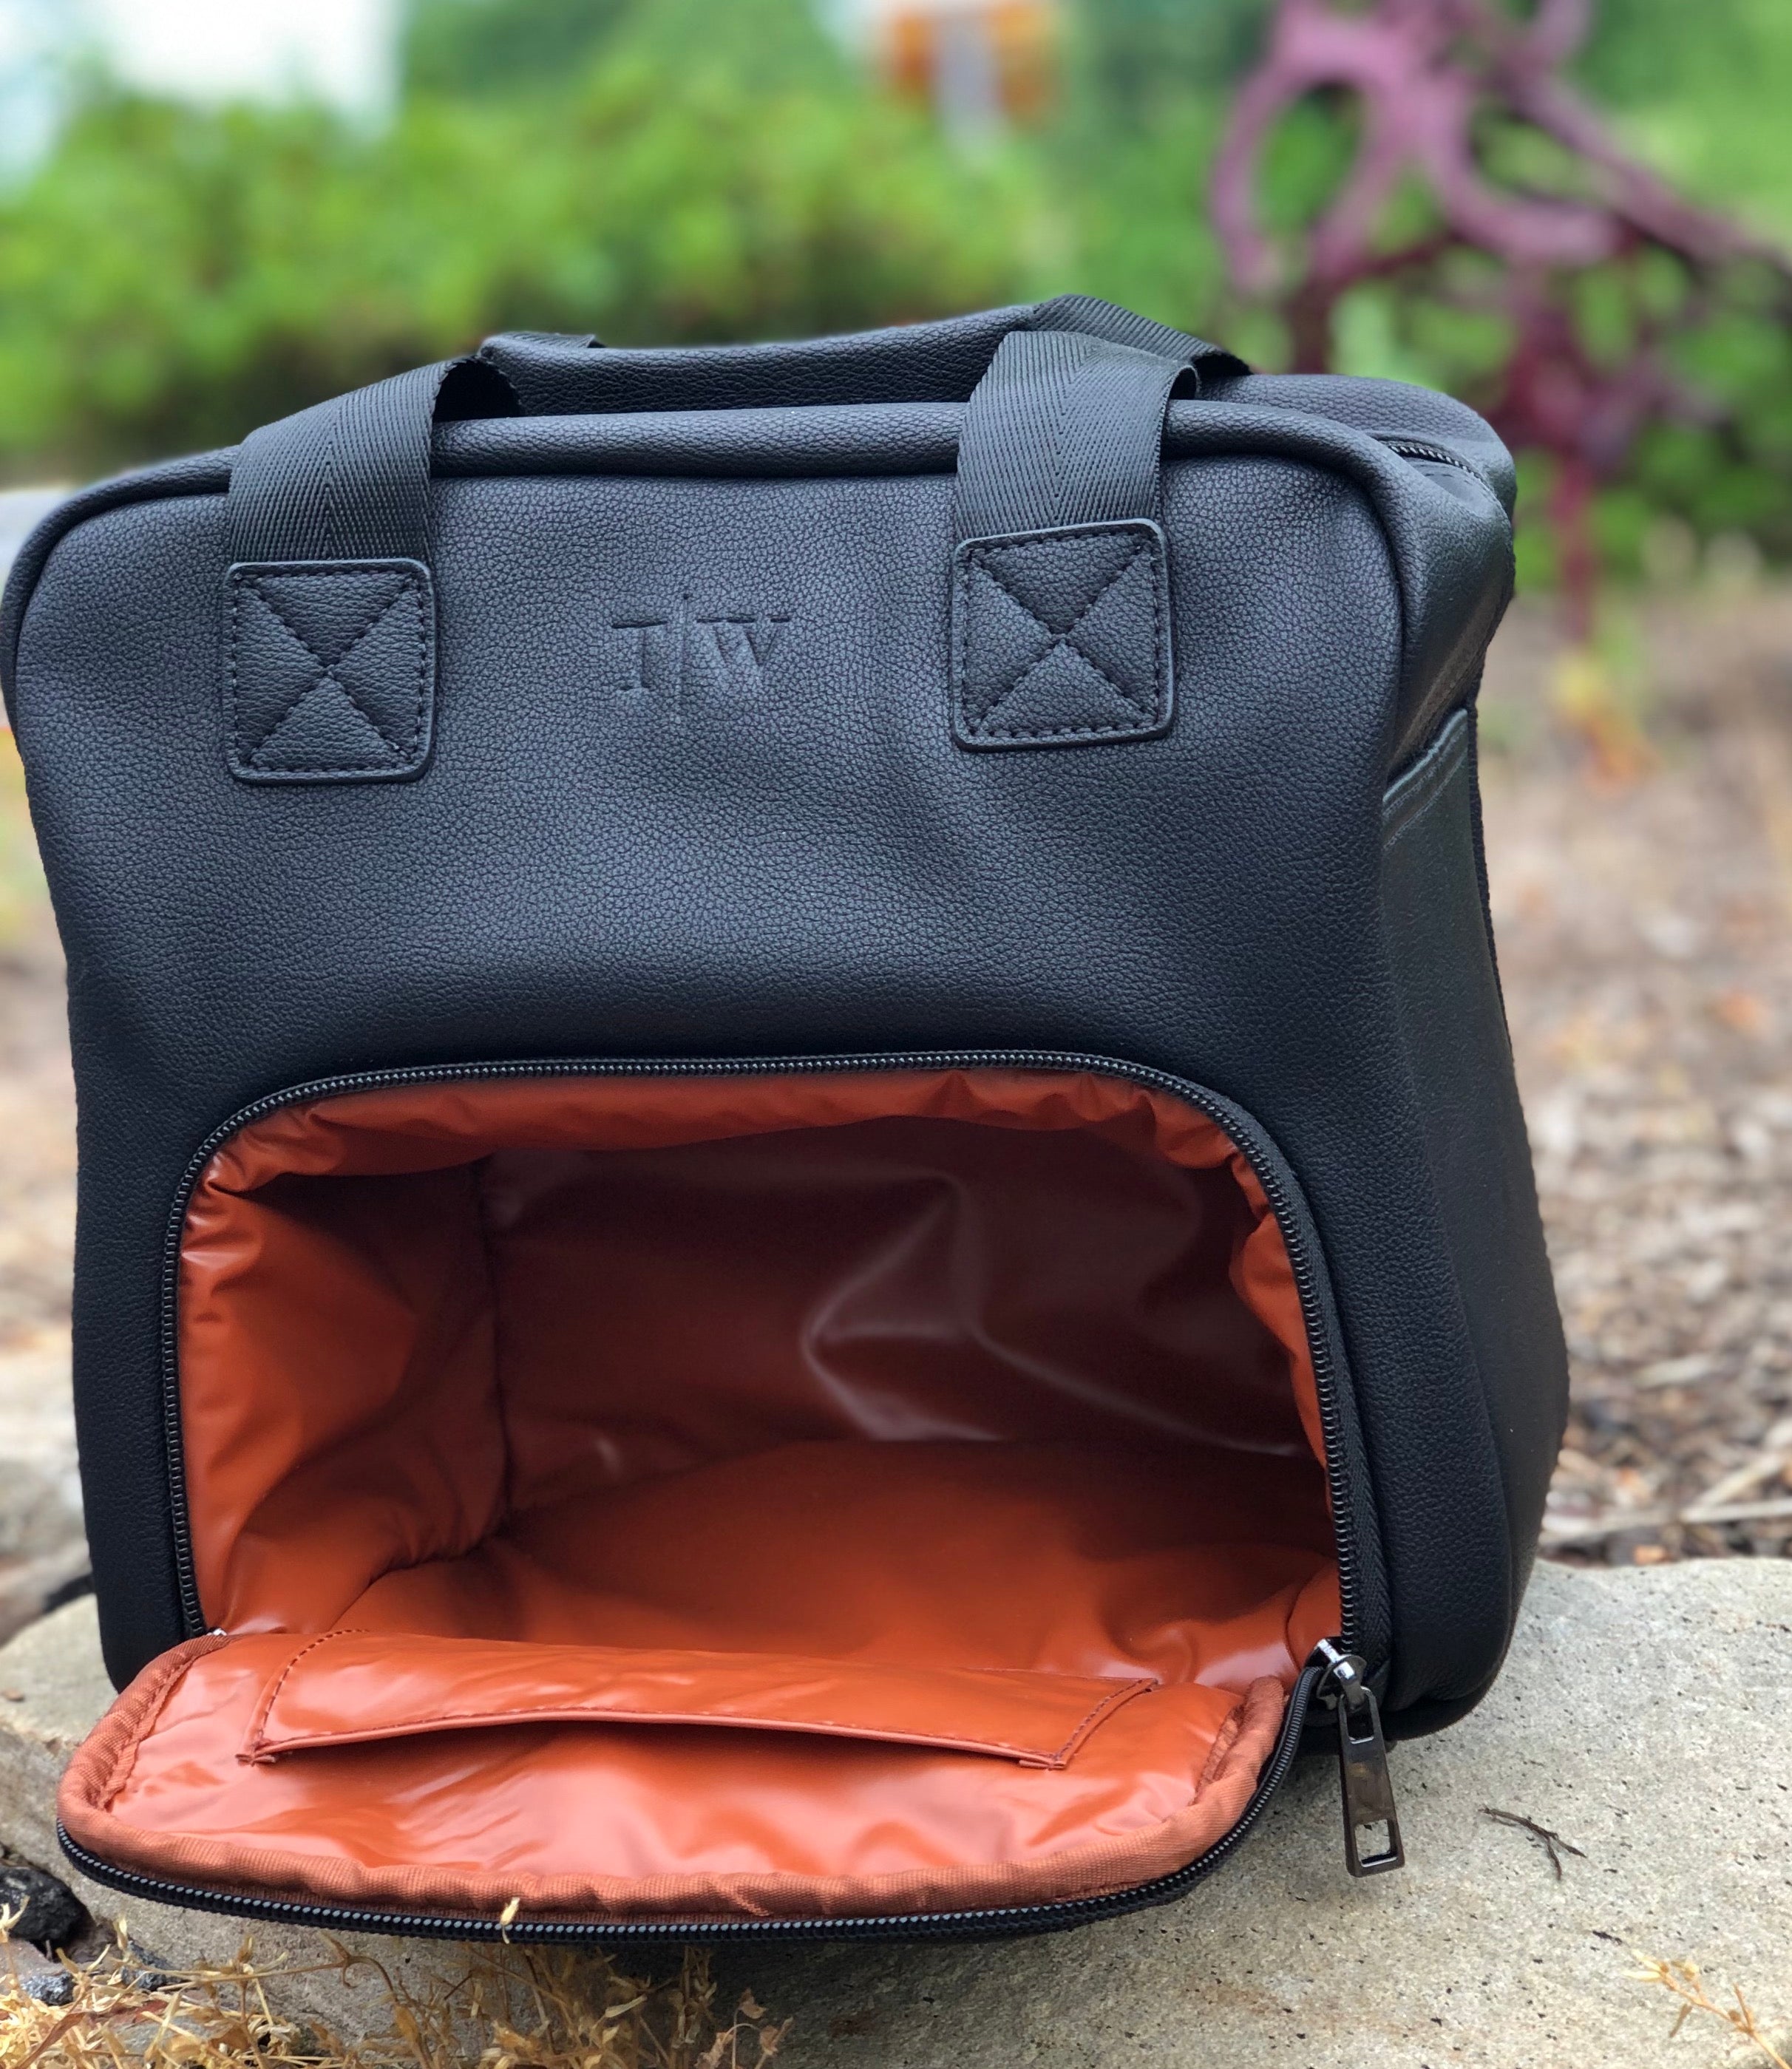 Black on Cognac Lunch Tote, Just in Time for Fall